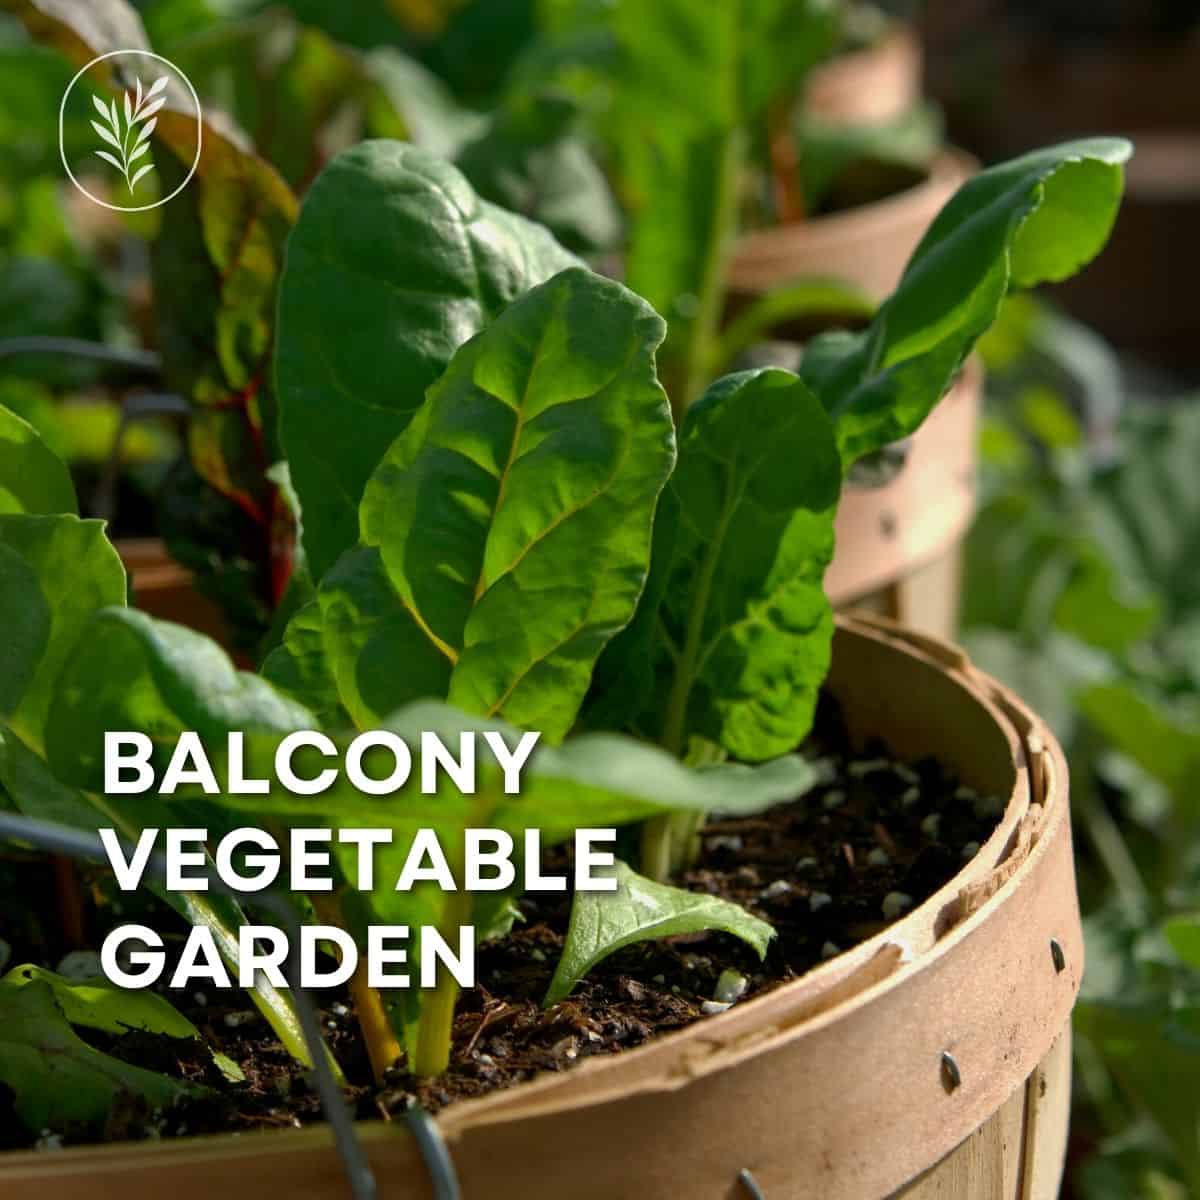 Your outdoor space can be the perfect place for a balcony vegetable garden! Via @home4theharvest